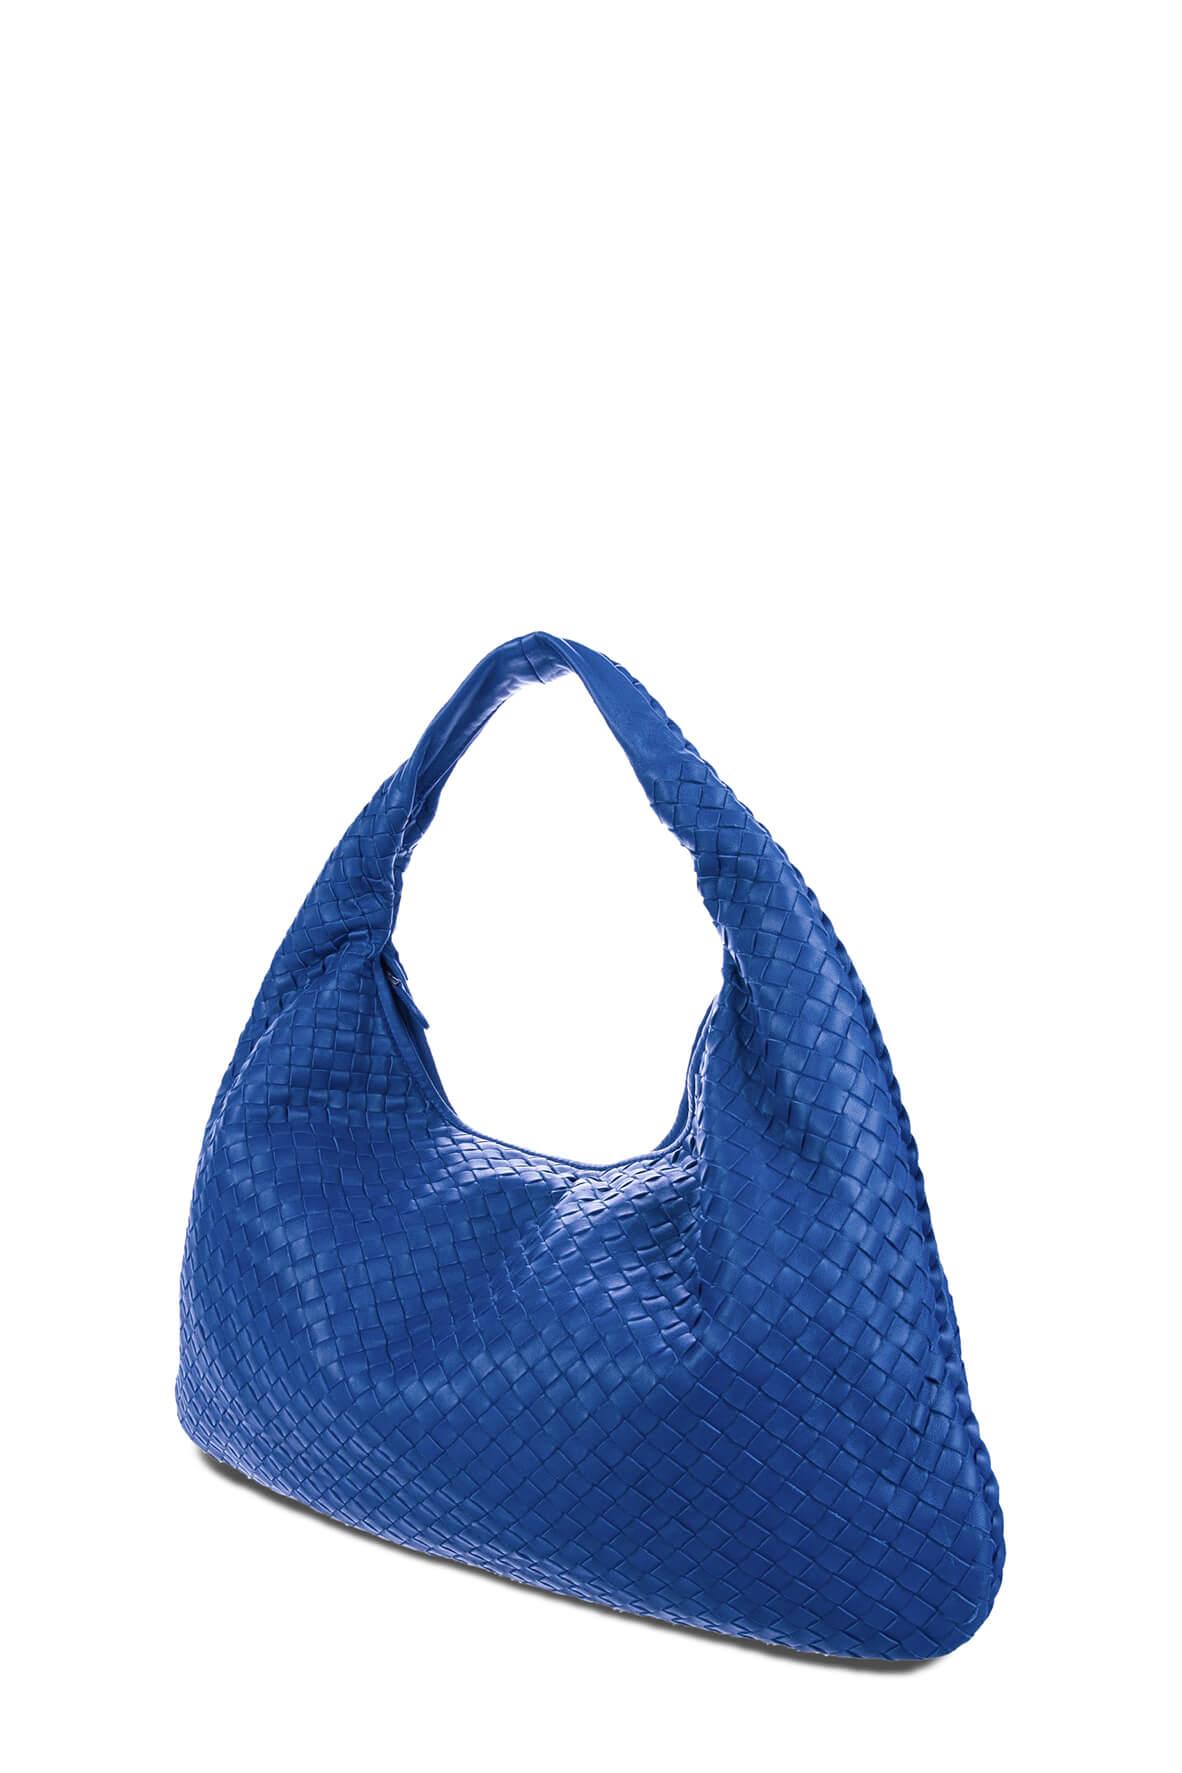 Large Intrecciato Hobo Cobalt Blue – Style Theory SG